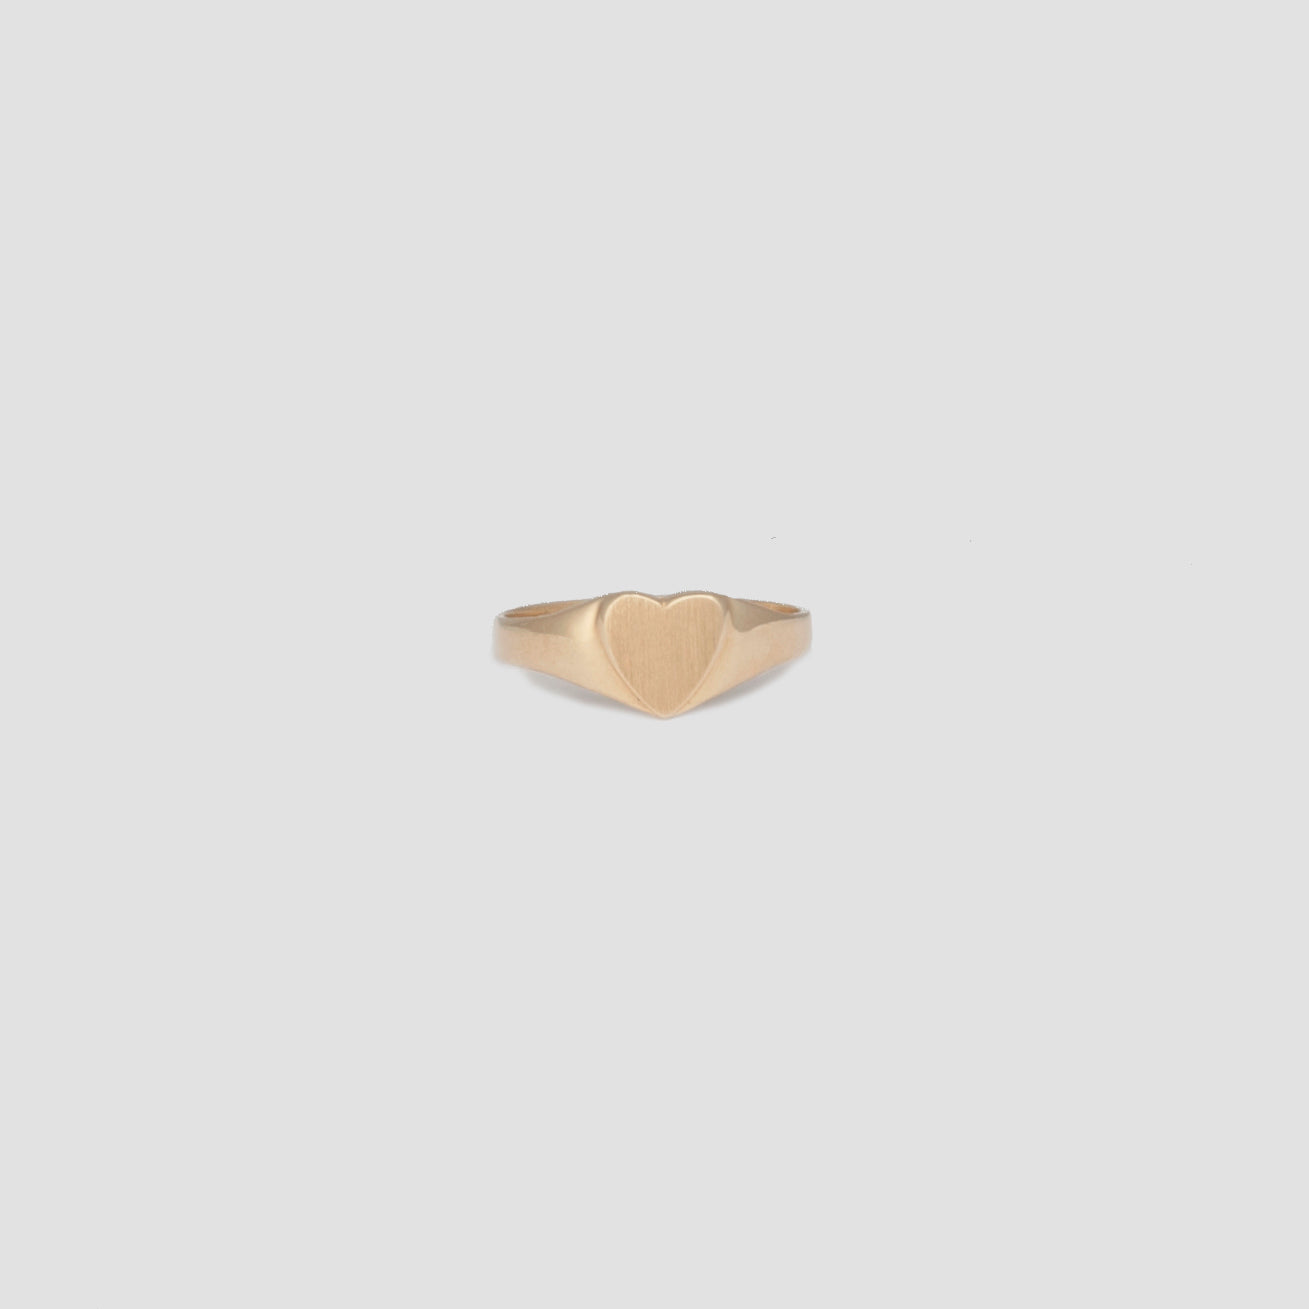 10k solid yellow gold heart-shaped signet ring